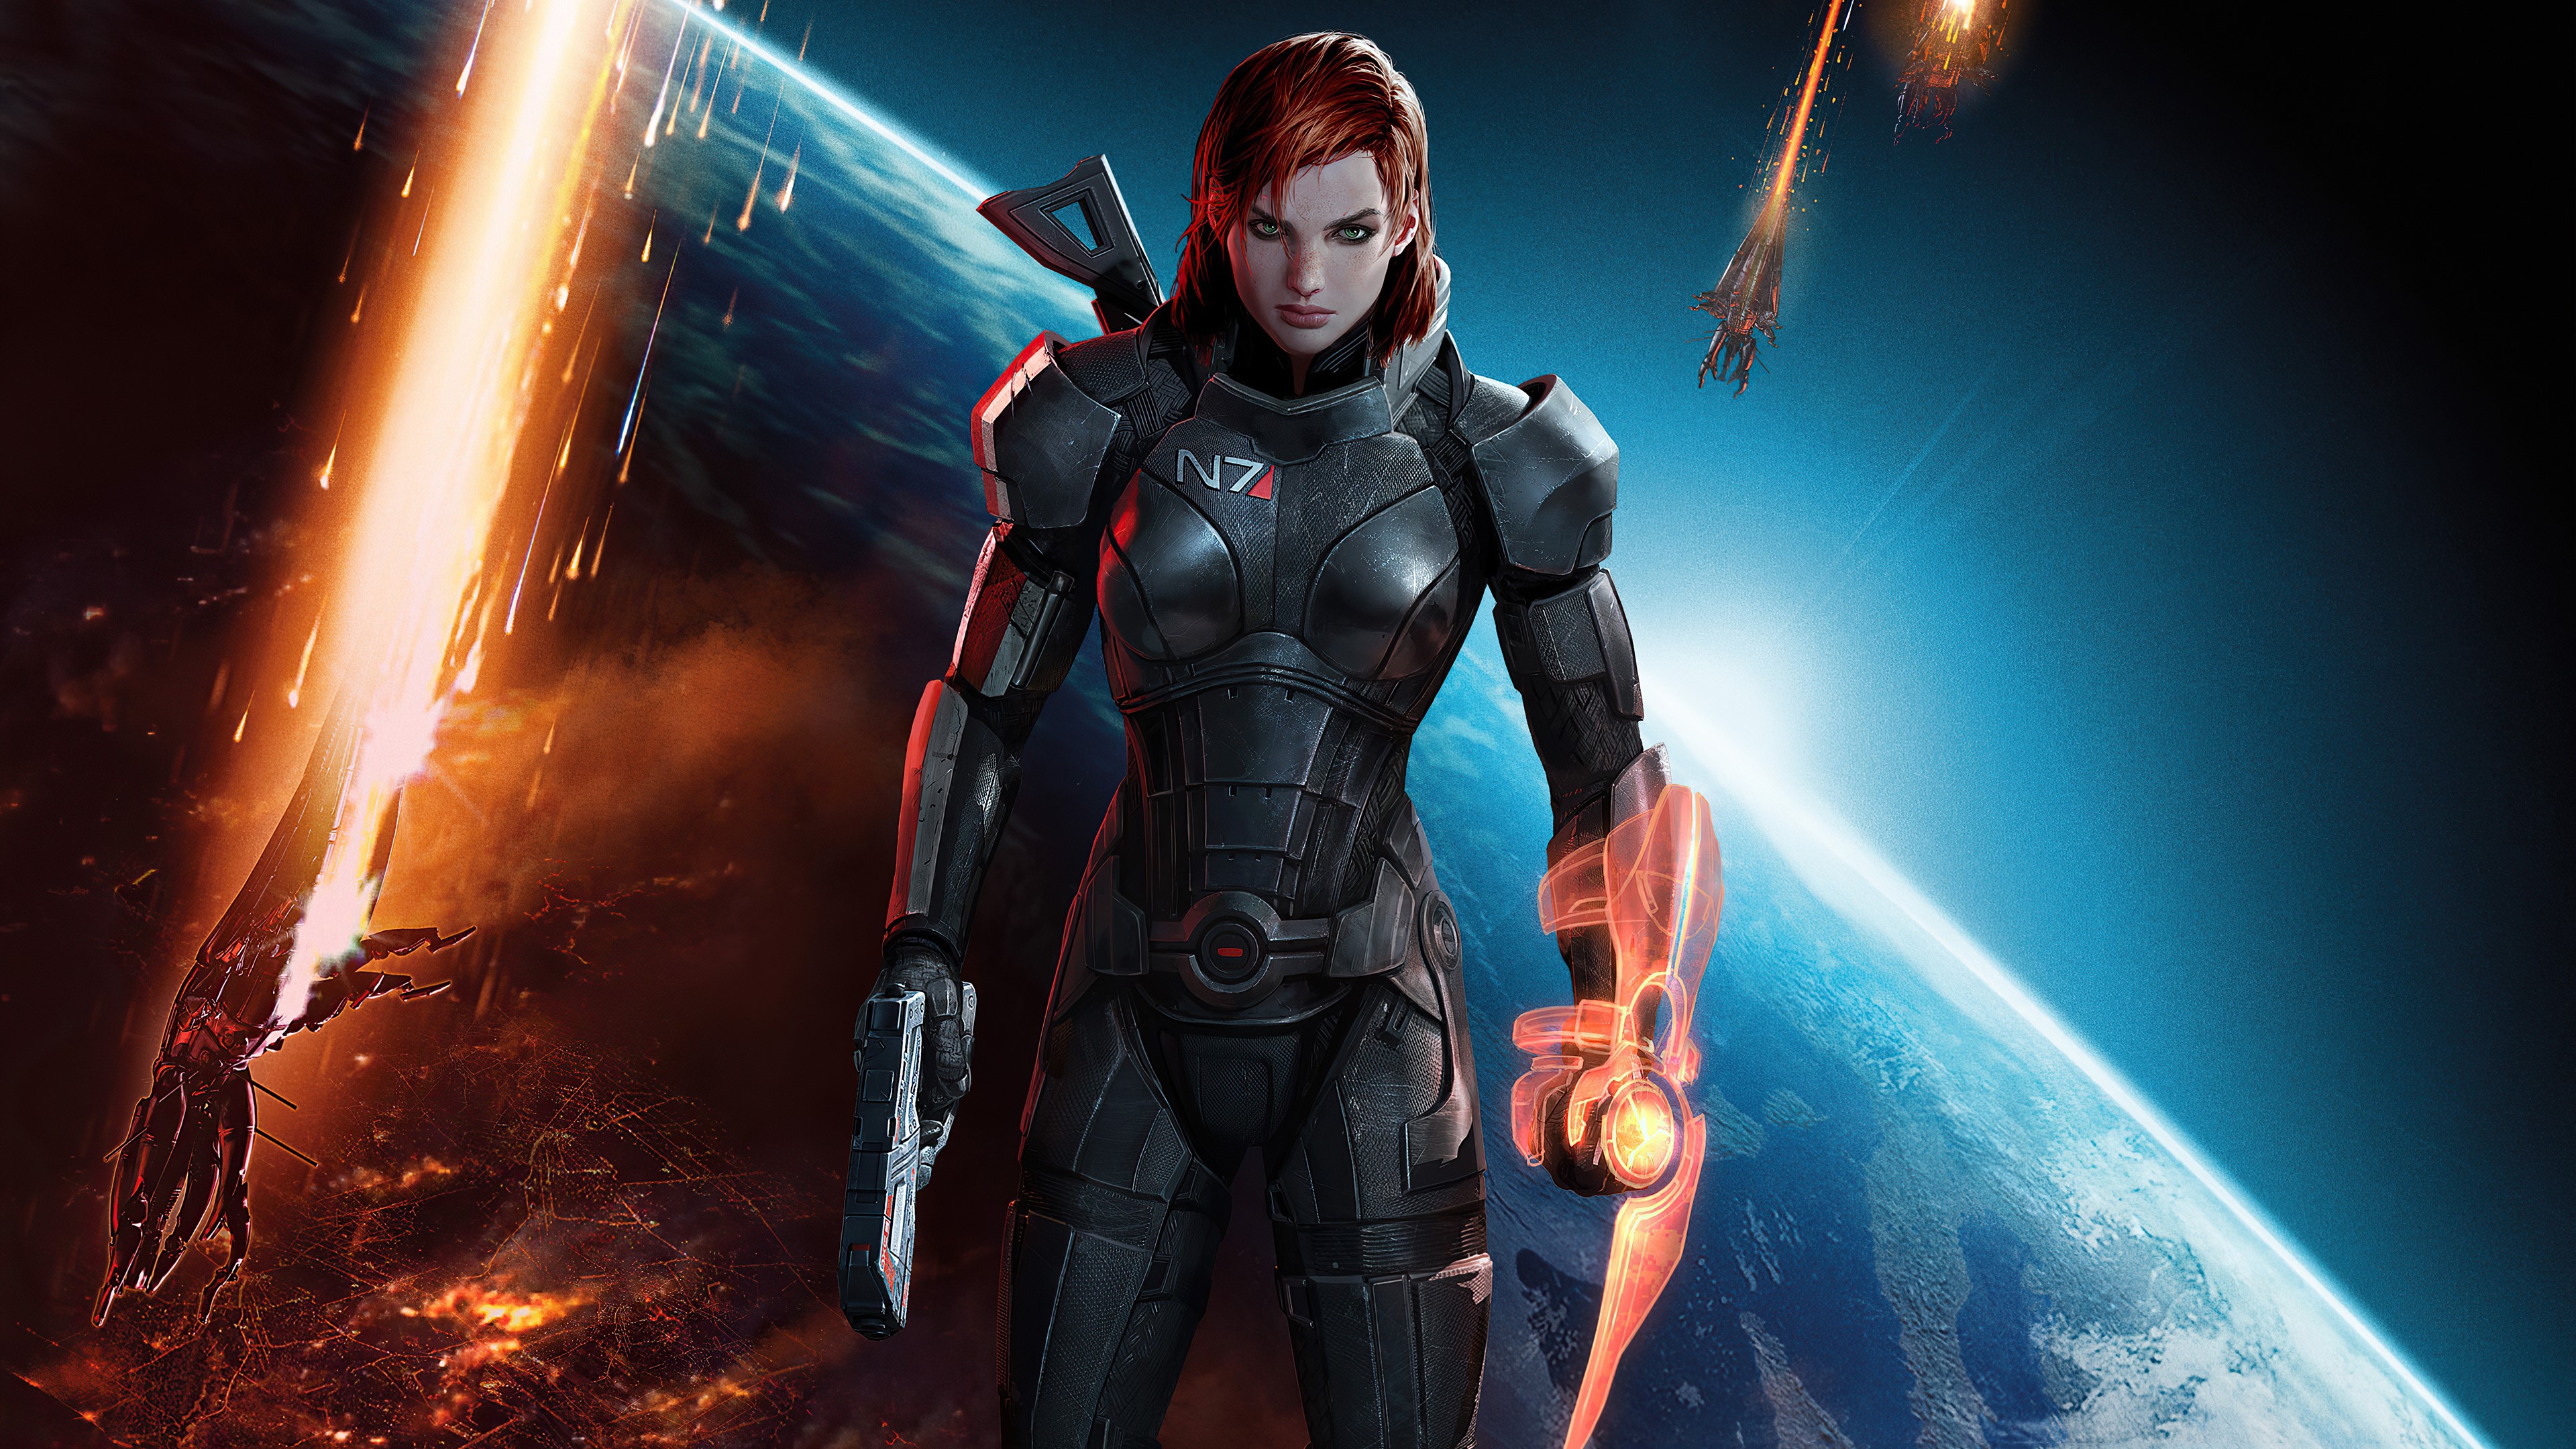 General 3840x2160 Mass Effect Mass Effect 3 video games Jane Shepard looking at viewer armor space video game girls gun video game characters girls with guns standing closed mouth redhead blue eyes freckles video game art planet N7 Commander Shepard